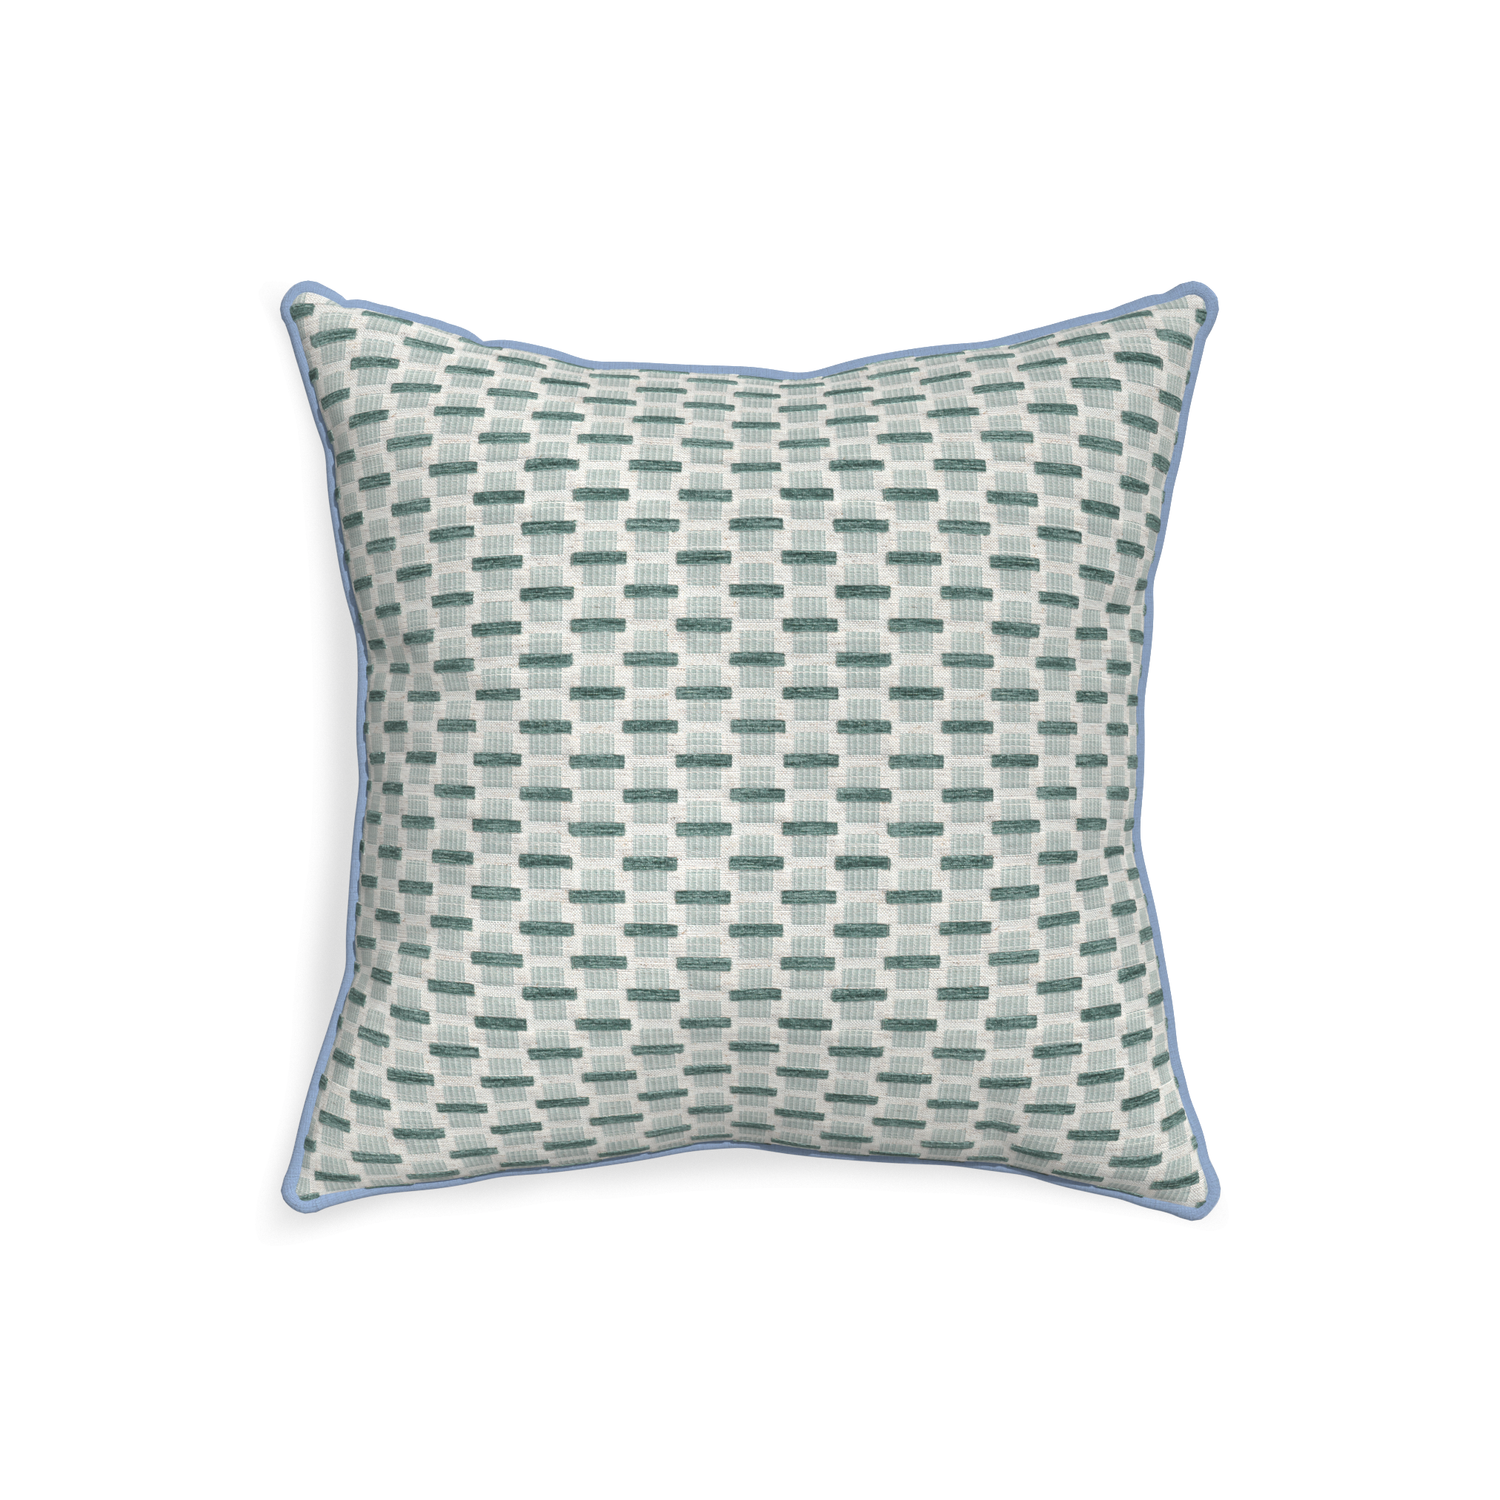 20-square willow mint custom green geometric chenillepillow with sky piping on white background